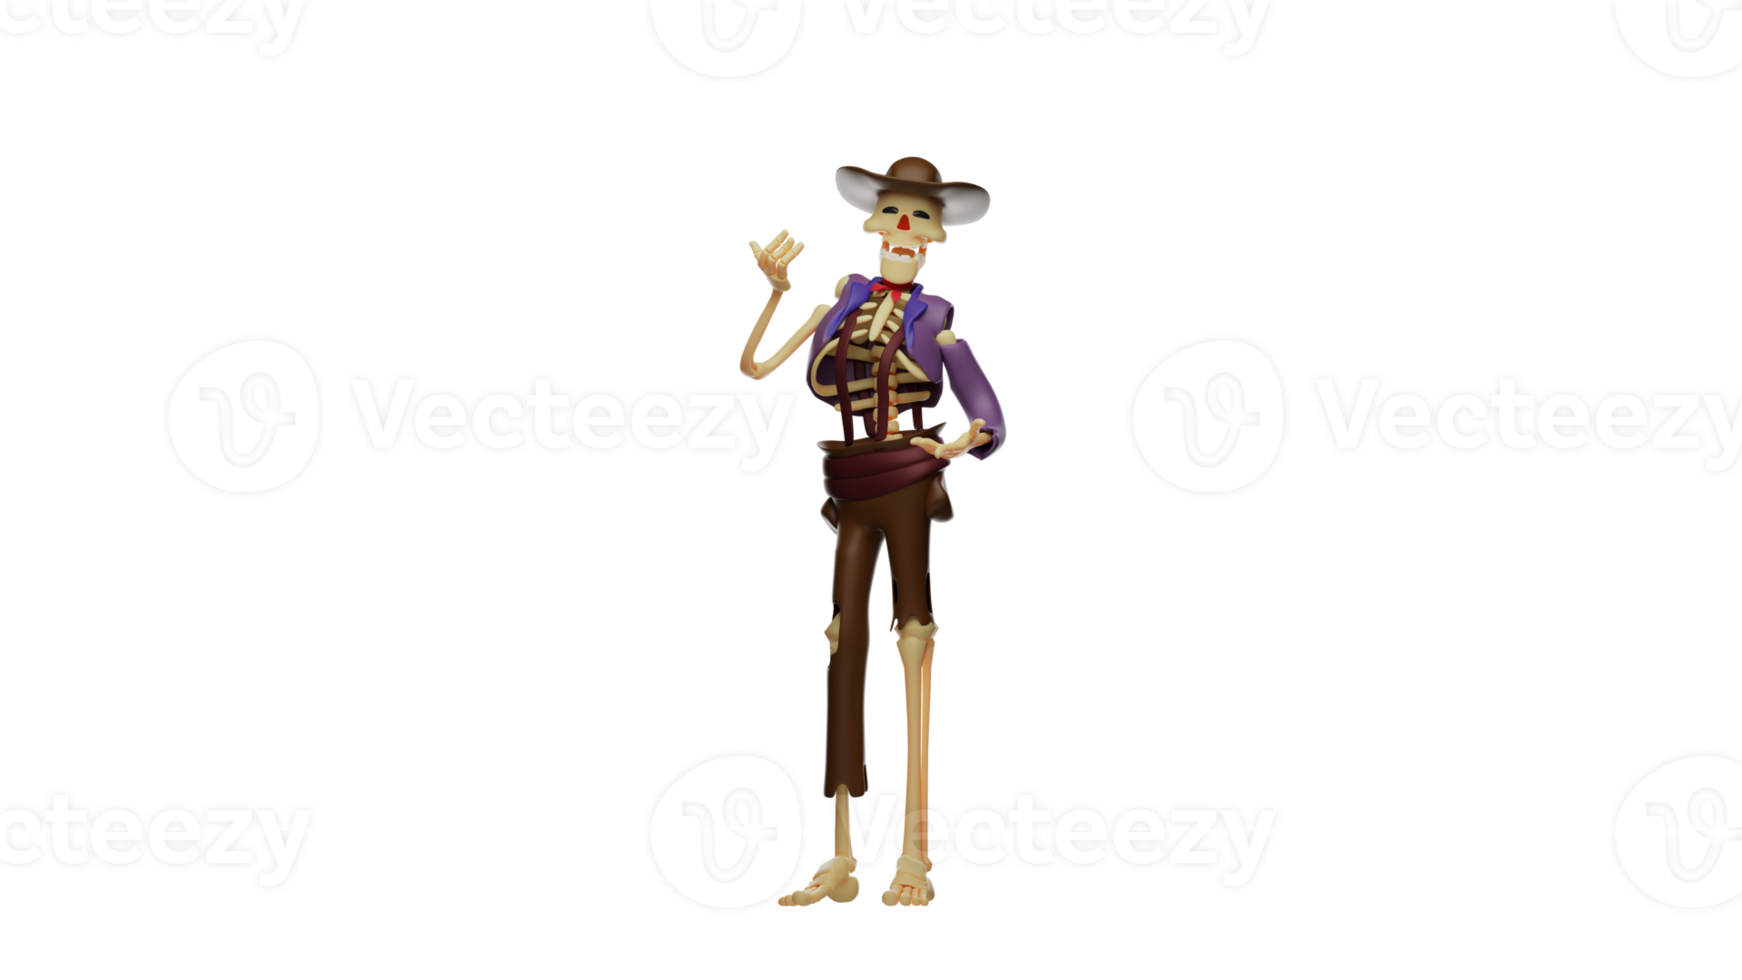 3D illustration. Skull Cowboy 3D Cartoon Character. Skull Cowboy wearing tattered clothes. Skull Cowboy laughing while gesticulating. 3d cartoon character png